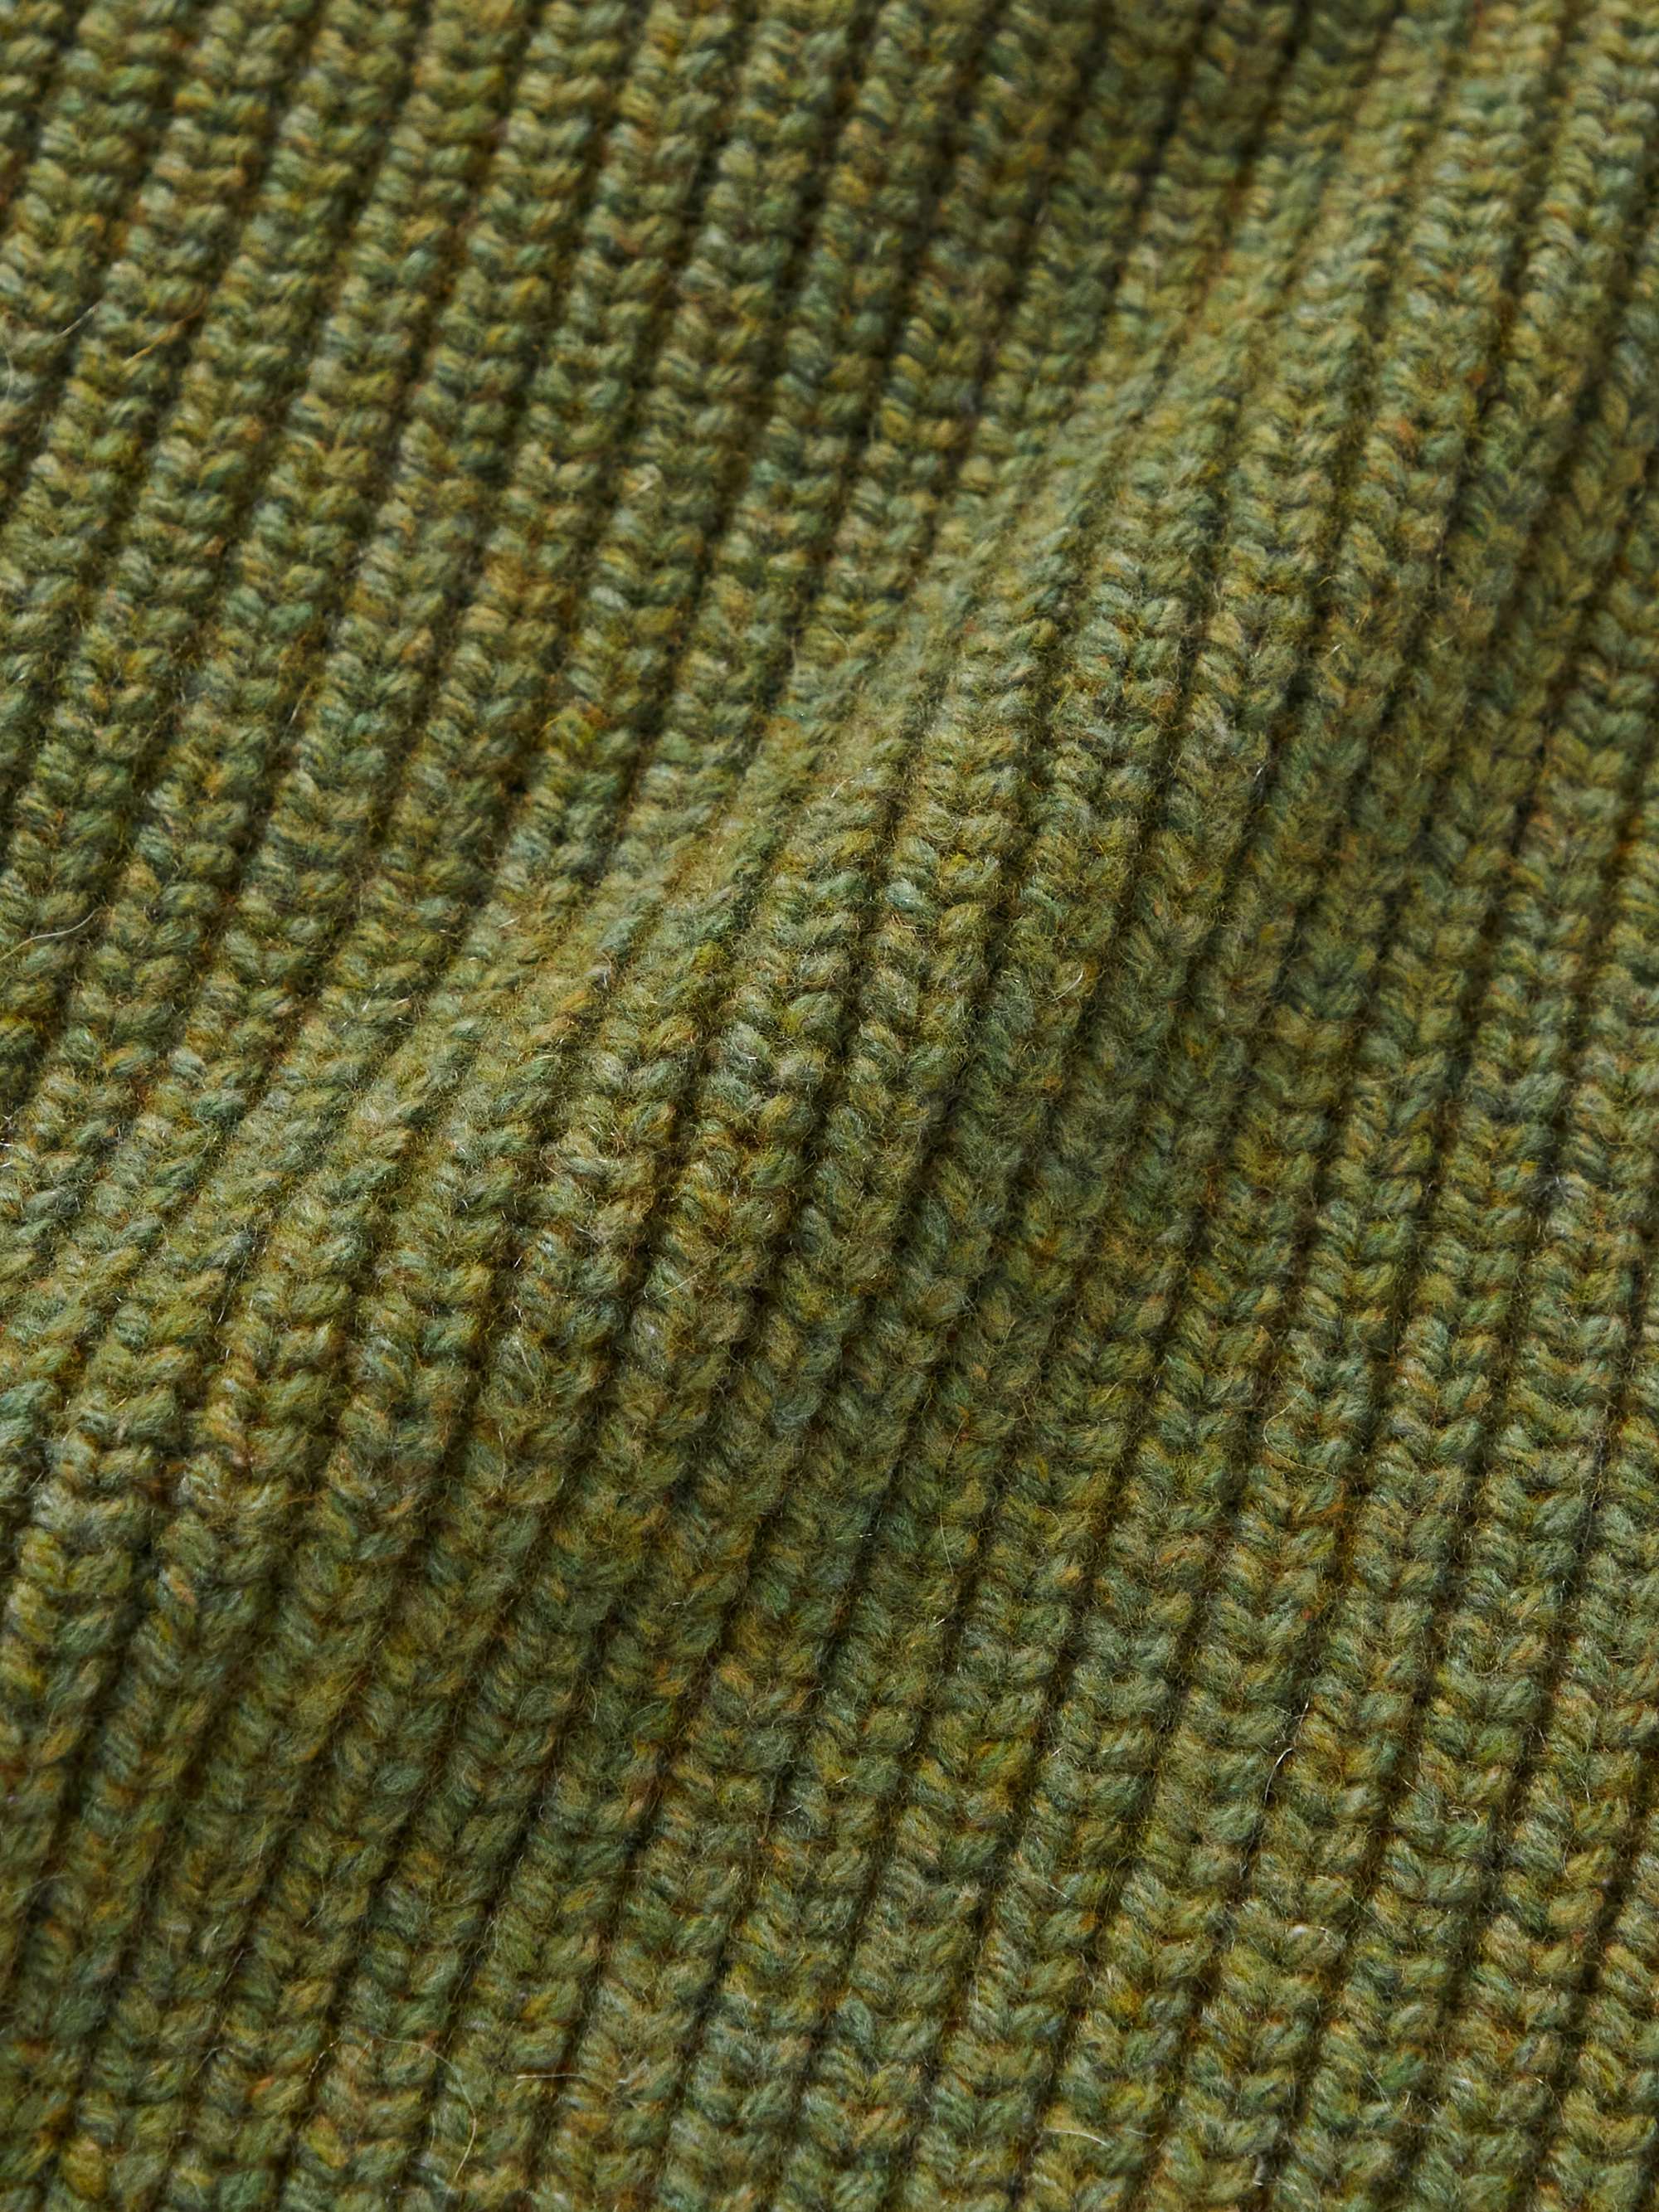 A KIND OF GUISE Badger Ribbed Merino Wool and Cashmere-Blend Sweater